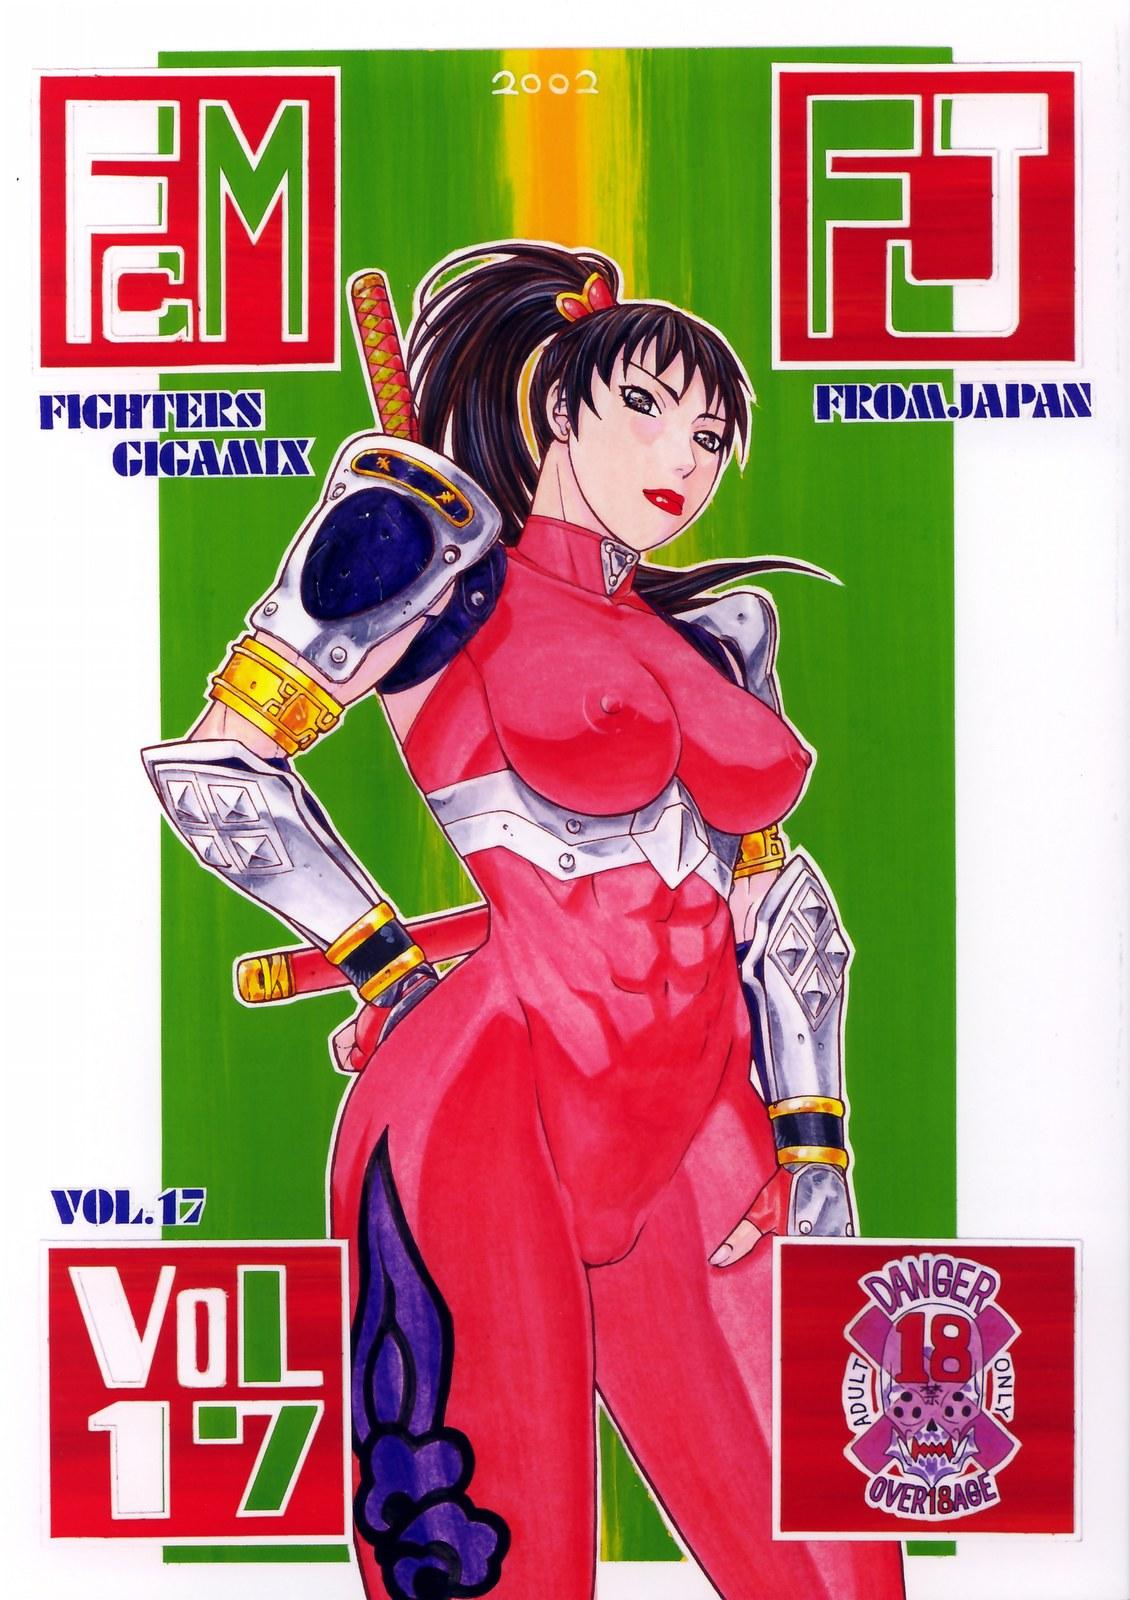 FIGHTERS GIGAMIX Vol. 17 0